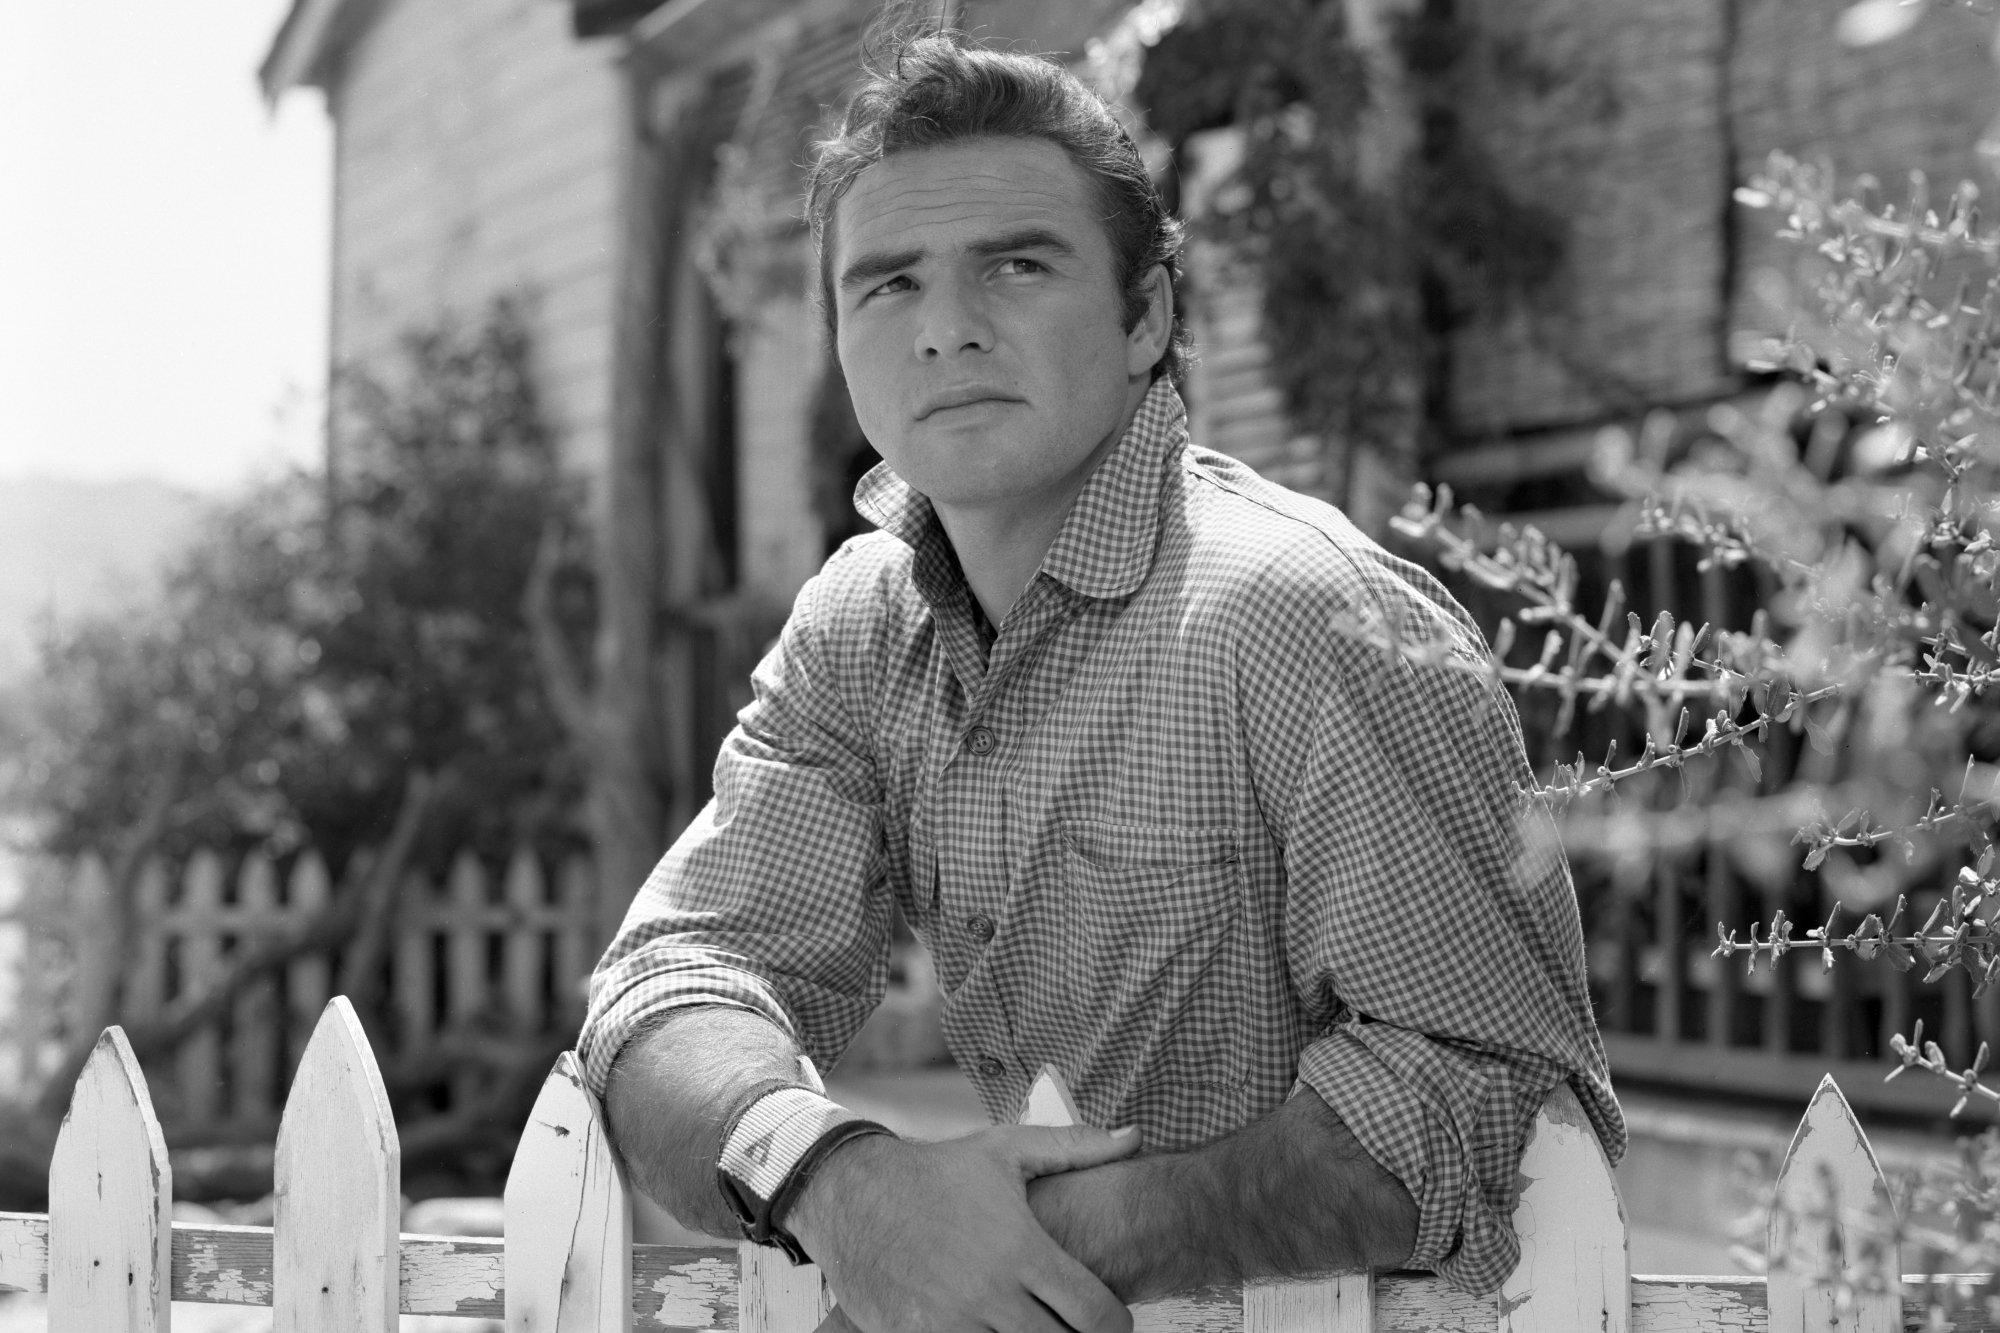 'Gunsmoke' Burt Reynolds as Quint Asper leaning on a white picket fence in a black-and-white photograph